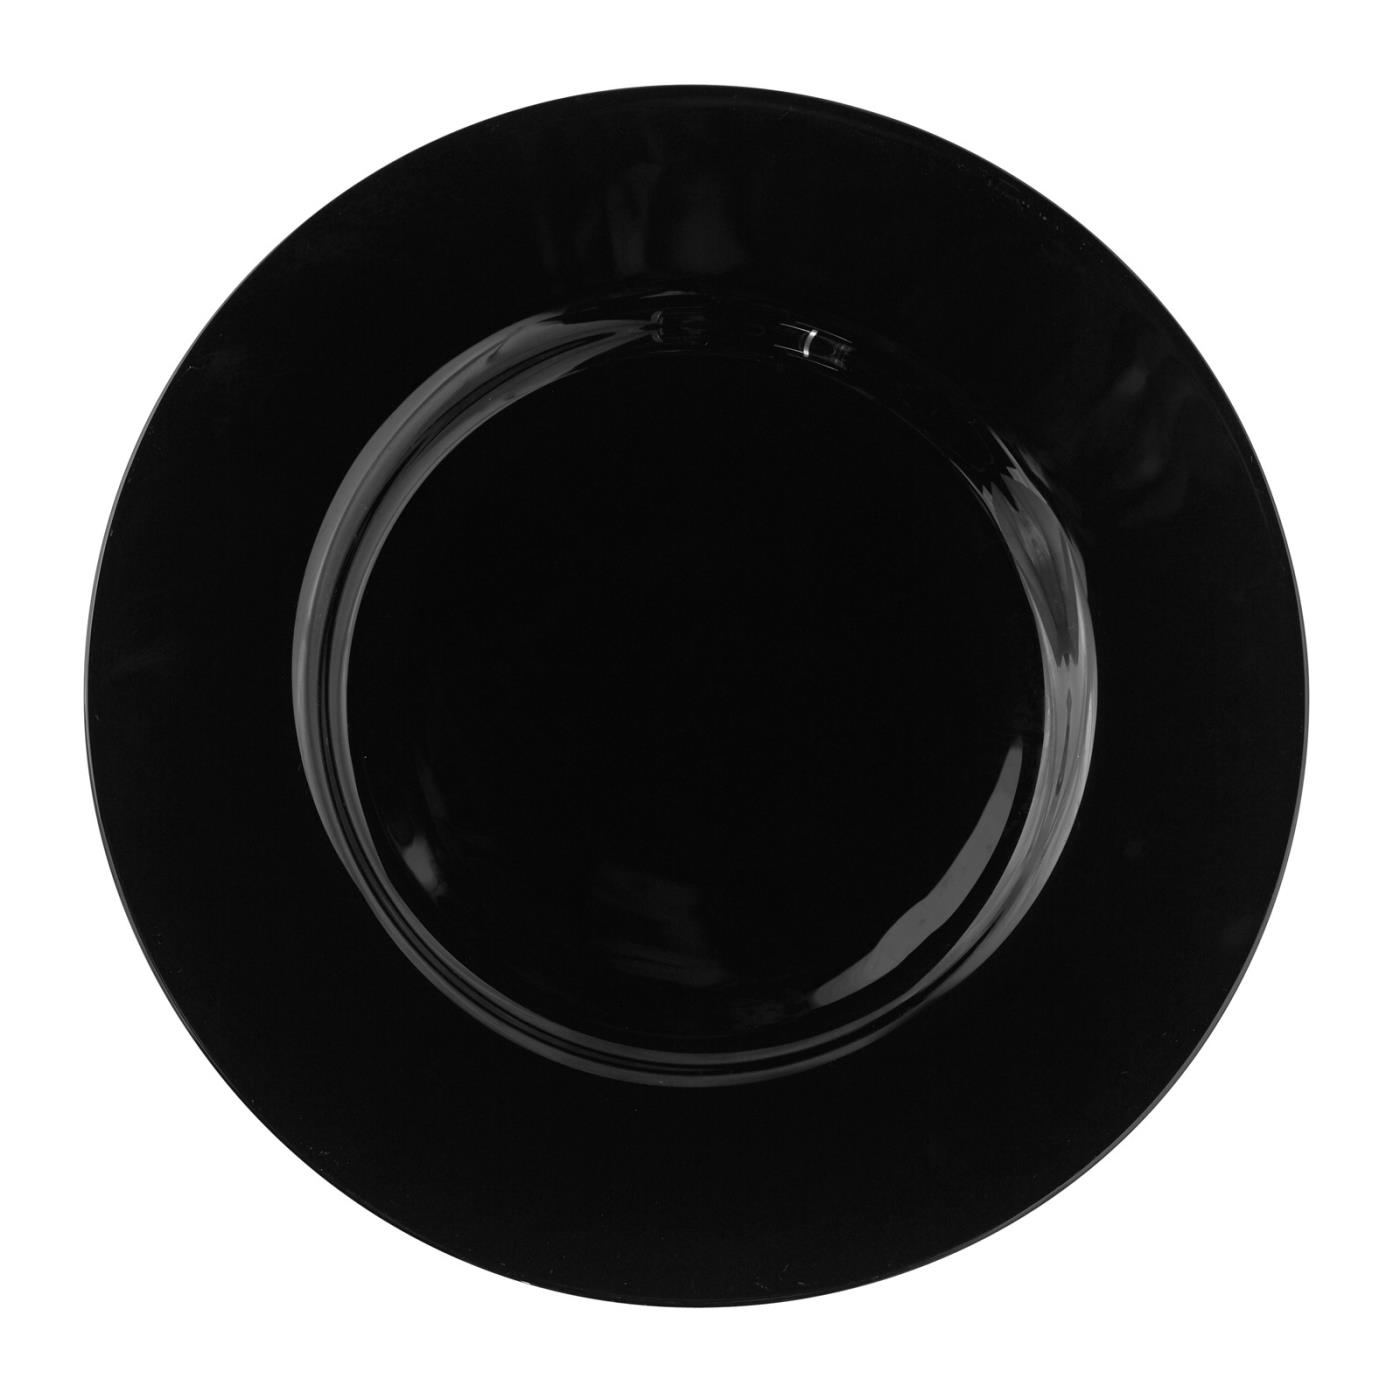 Black Rim Collection -  Lunch Plate 9.75"